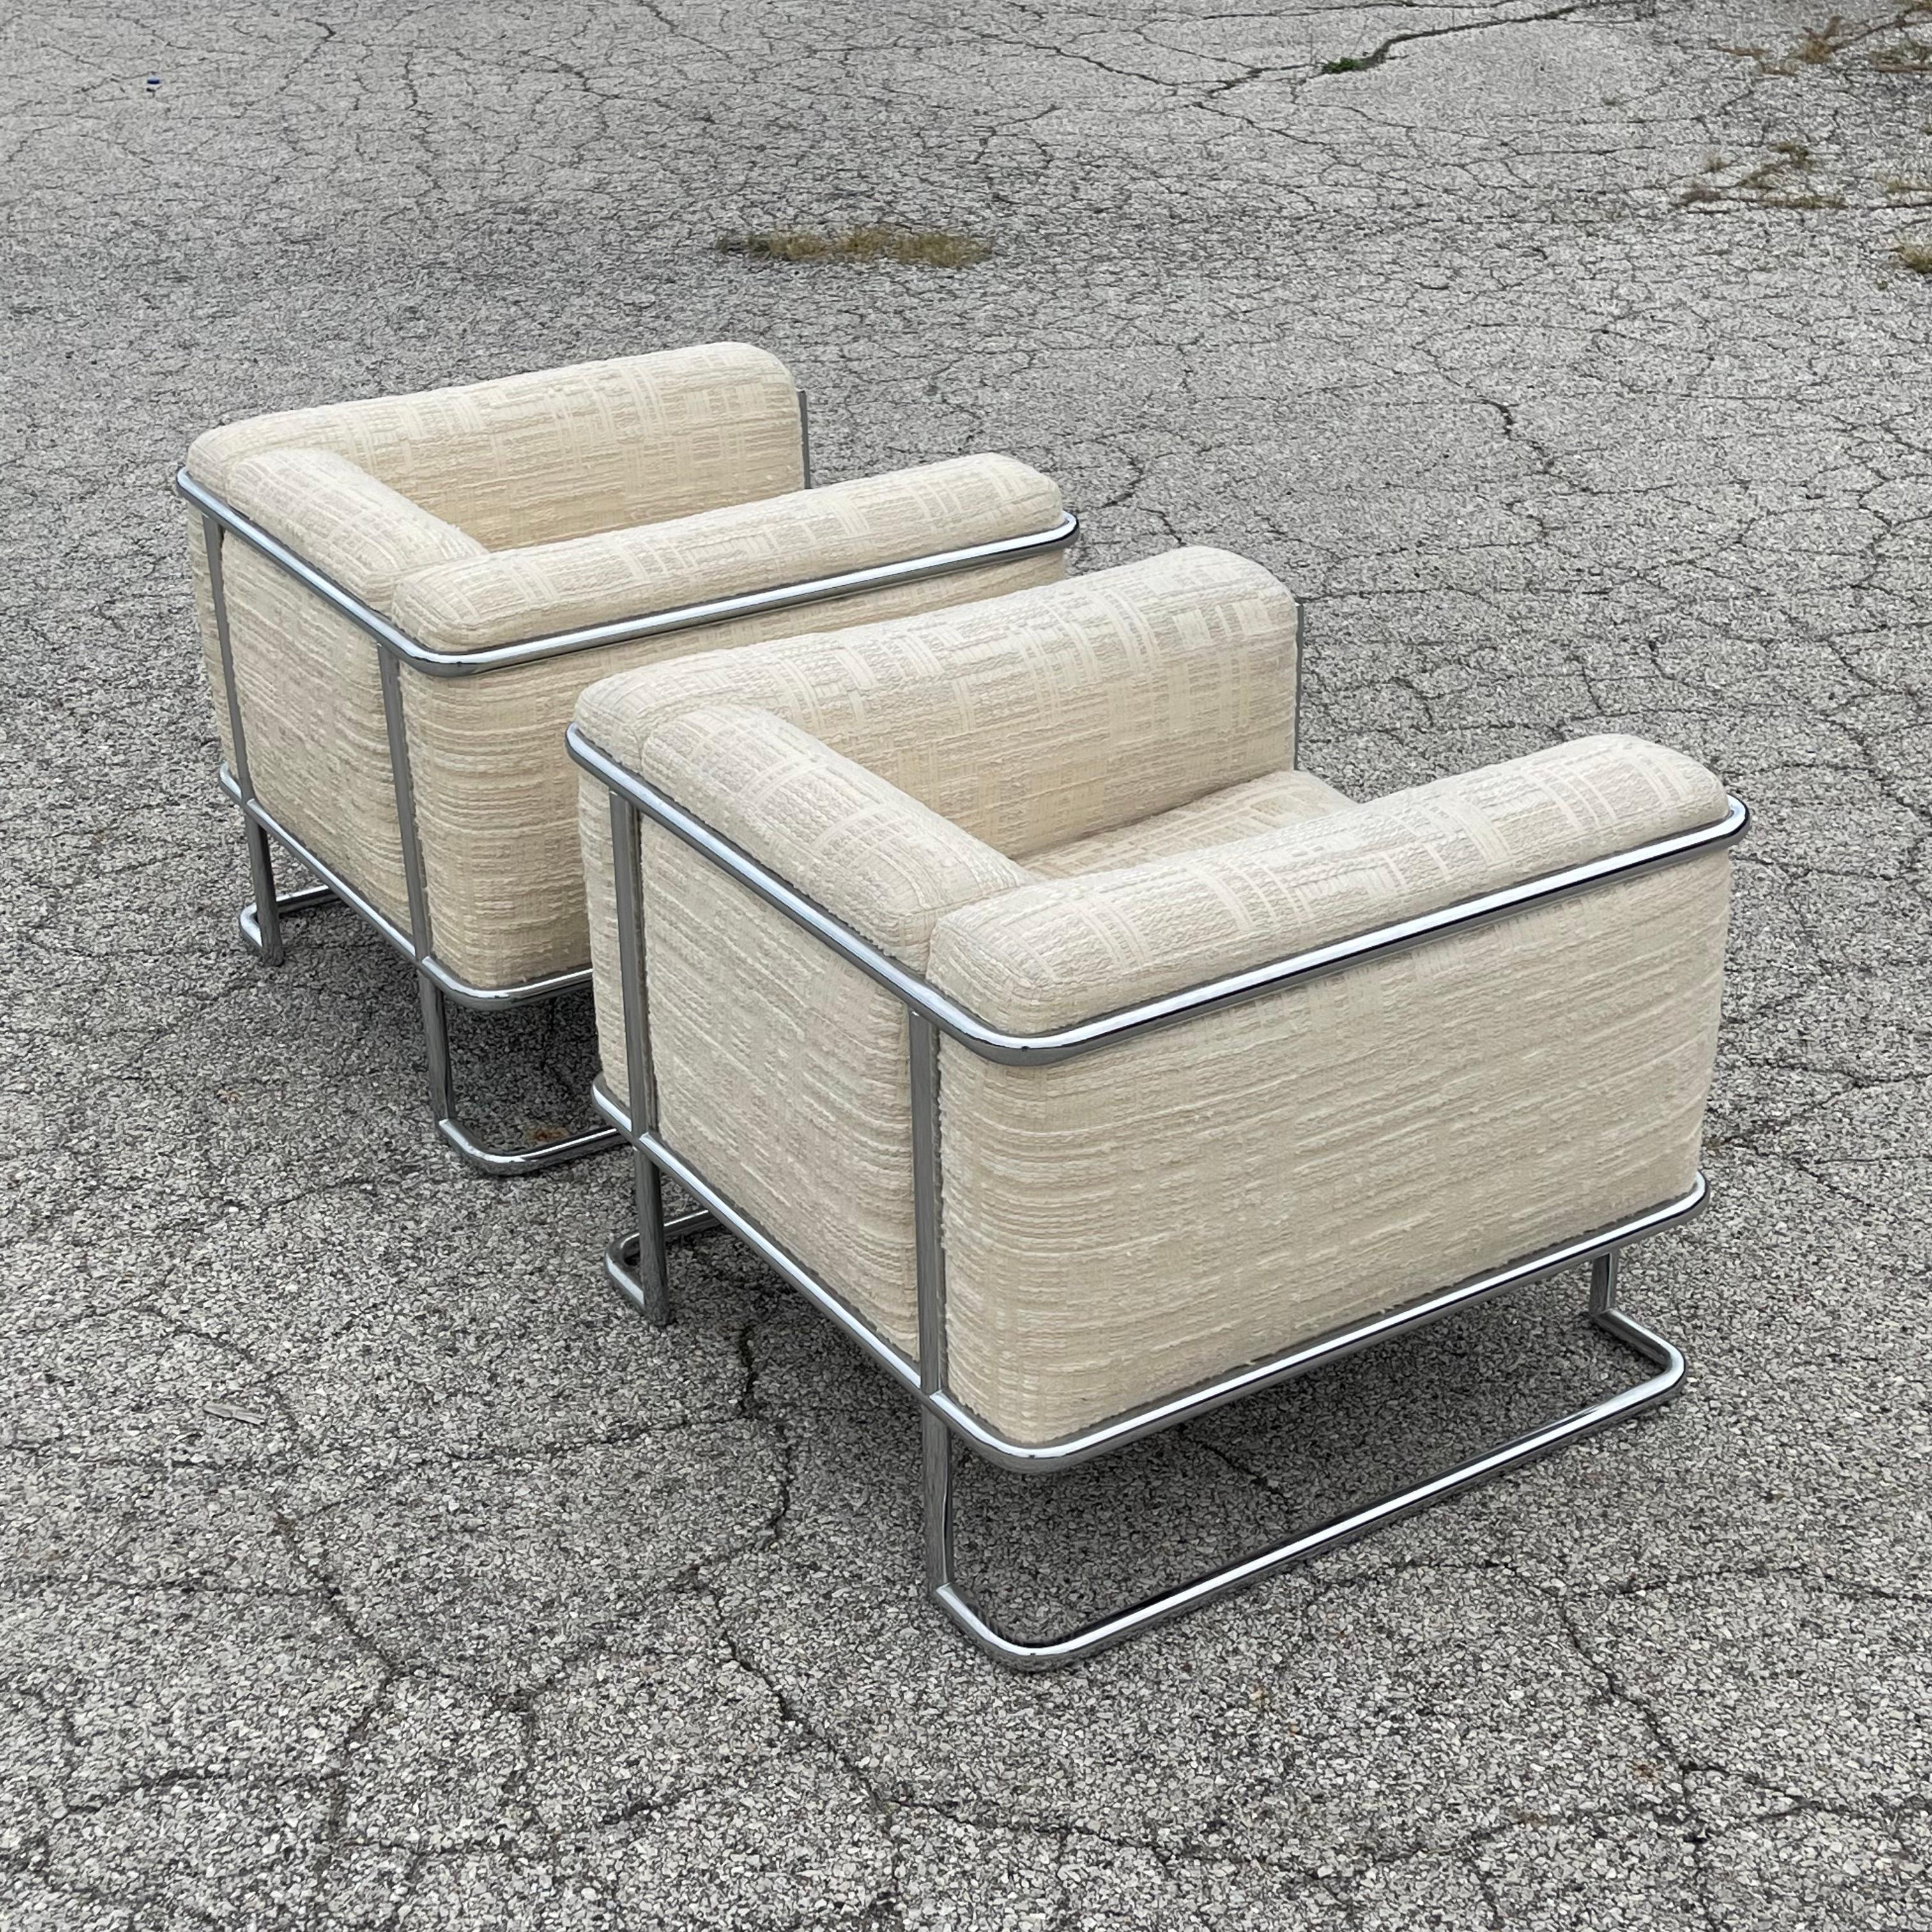 Plated John Mascheroni Pair of Lounge Chairs by Swaim Originals For Sale